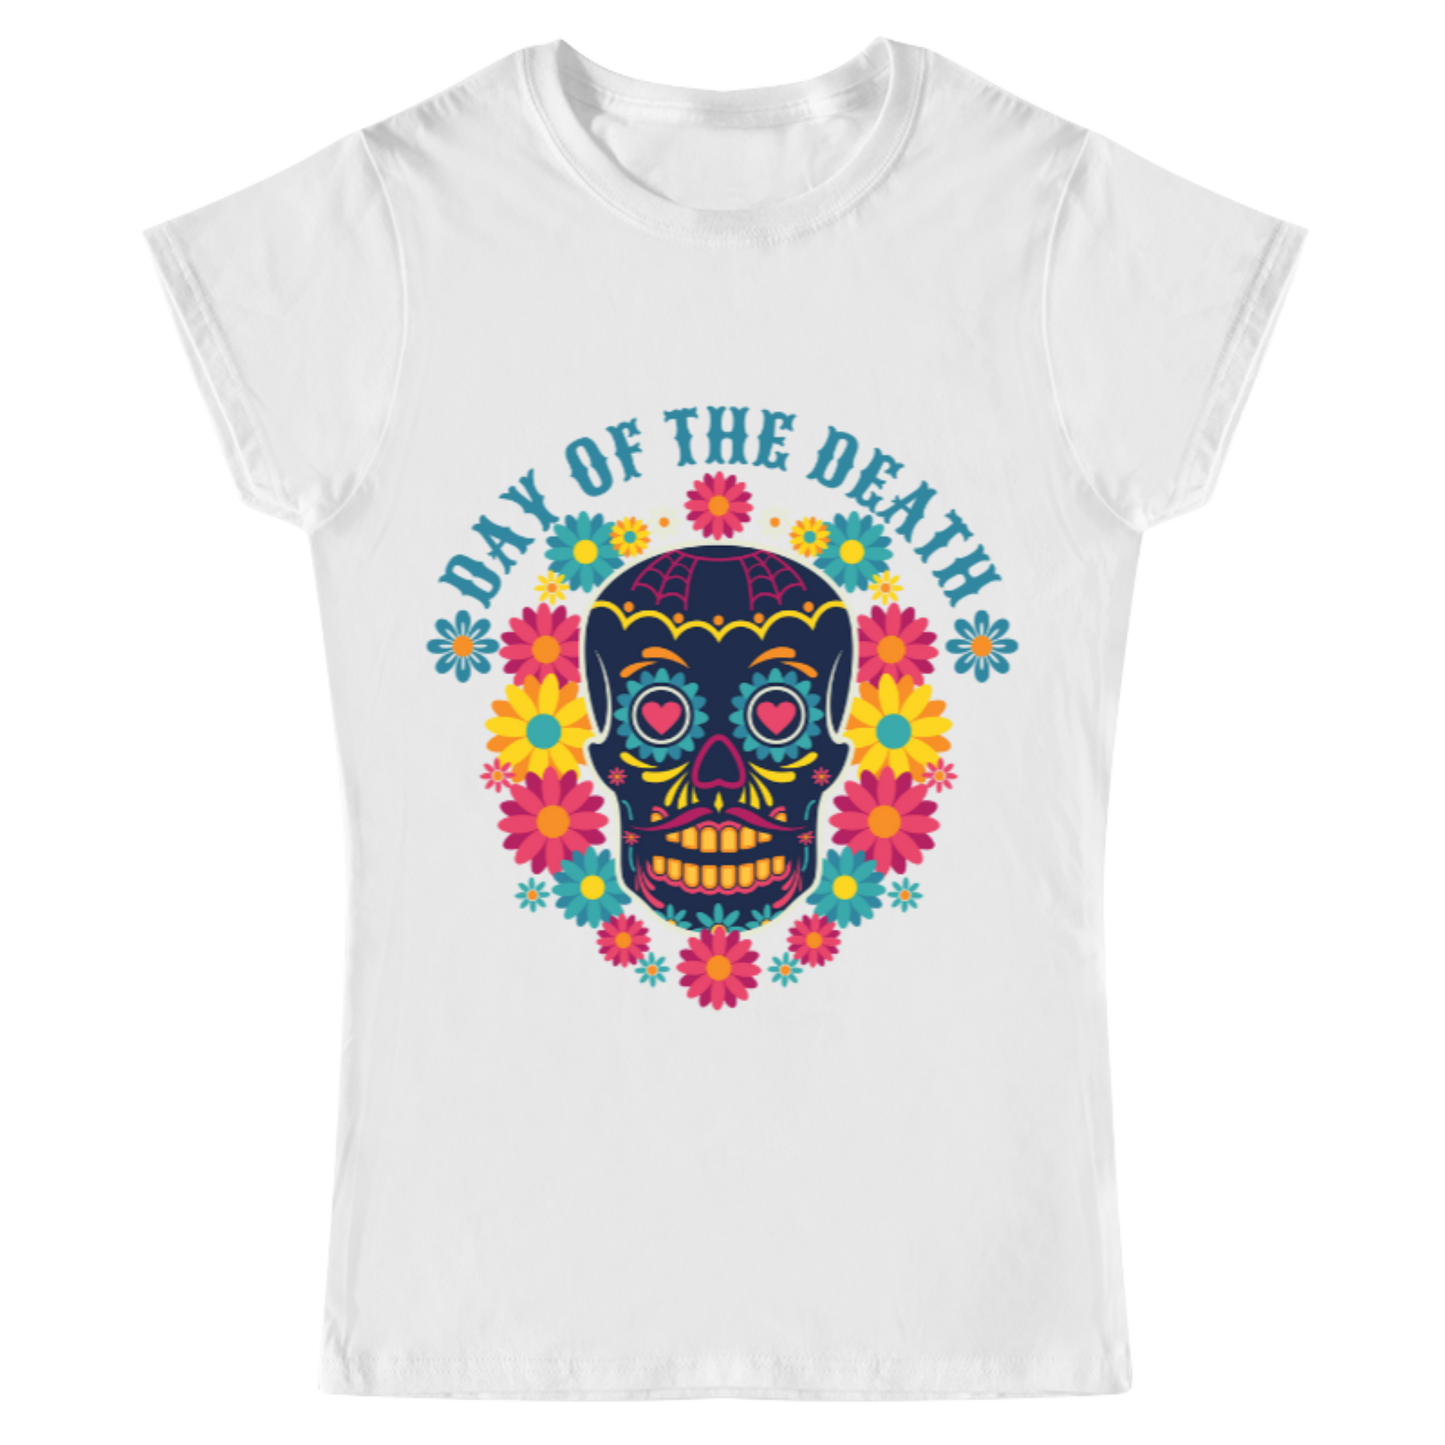 Playera Day of the Death Blanca - Mujer